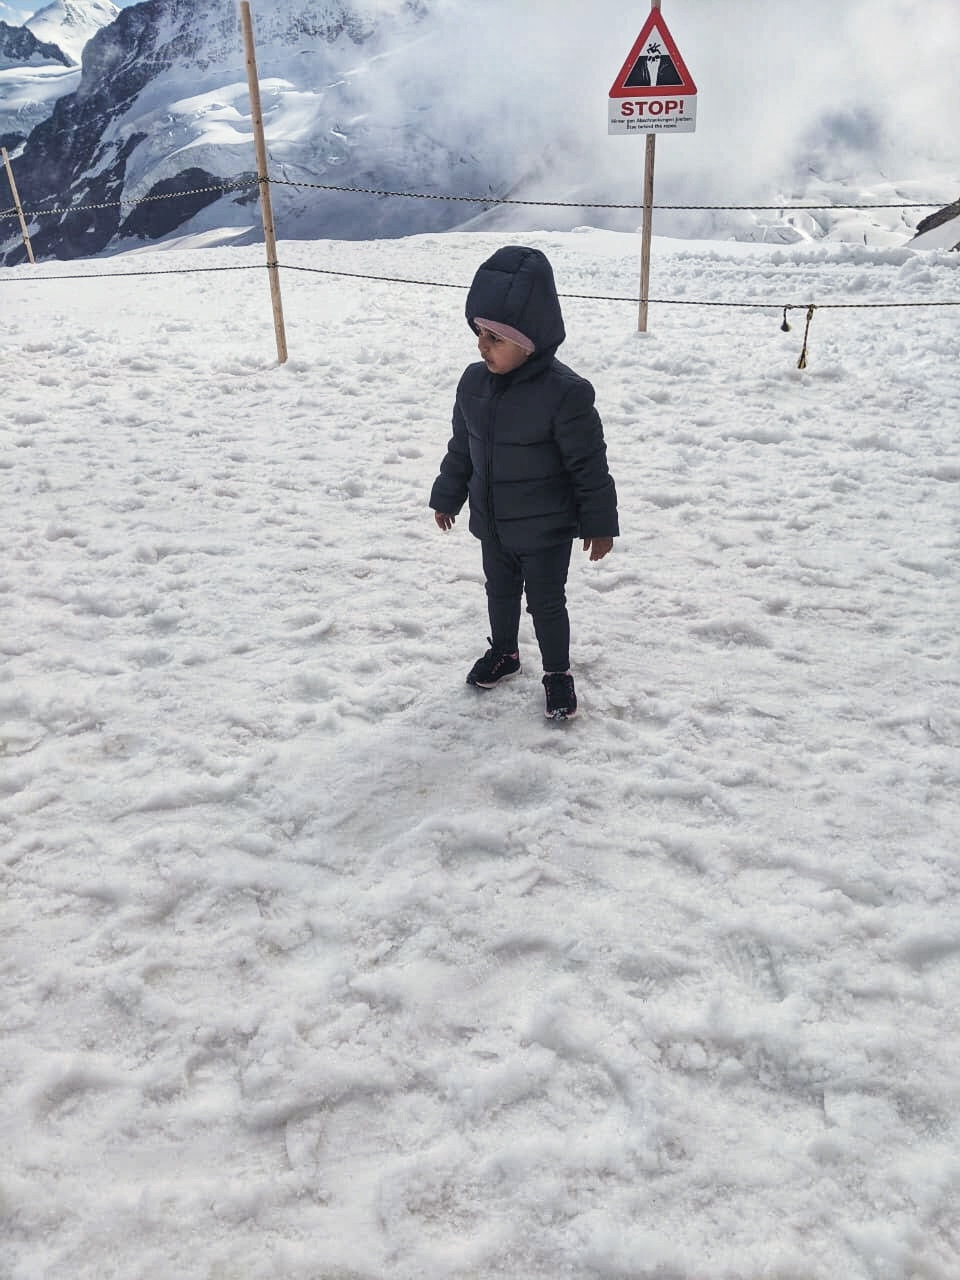 A kid is fascinated by the snow in Mount Titlis